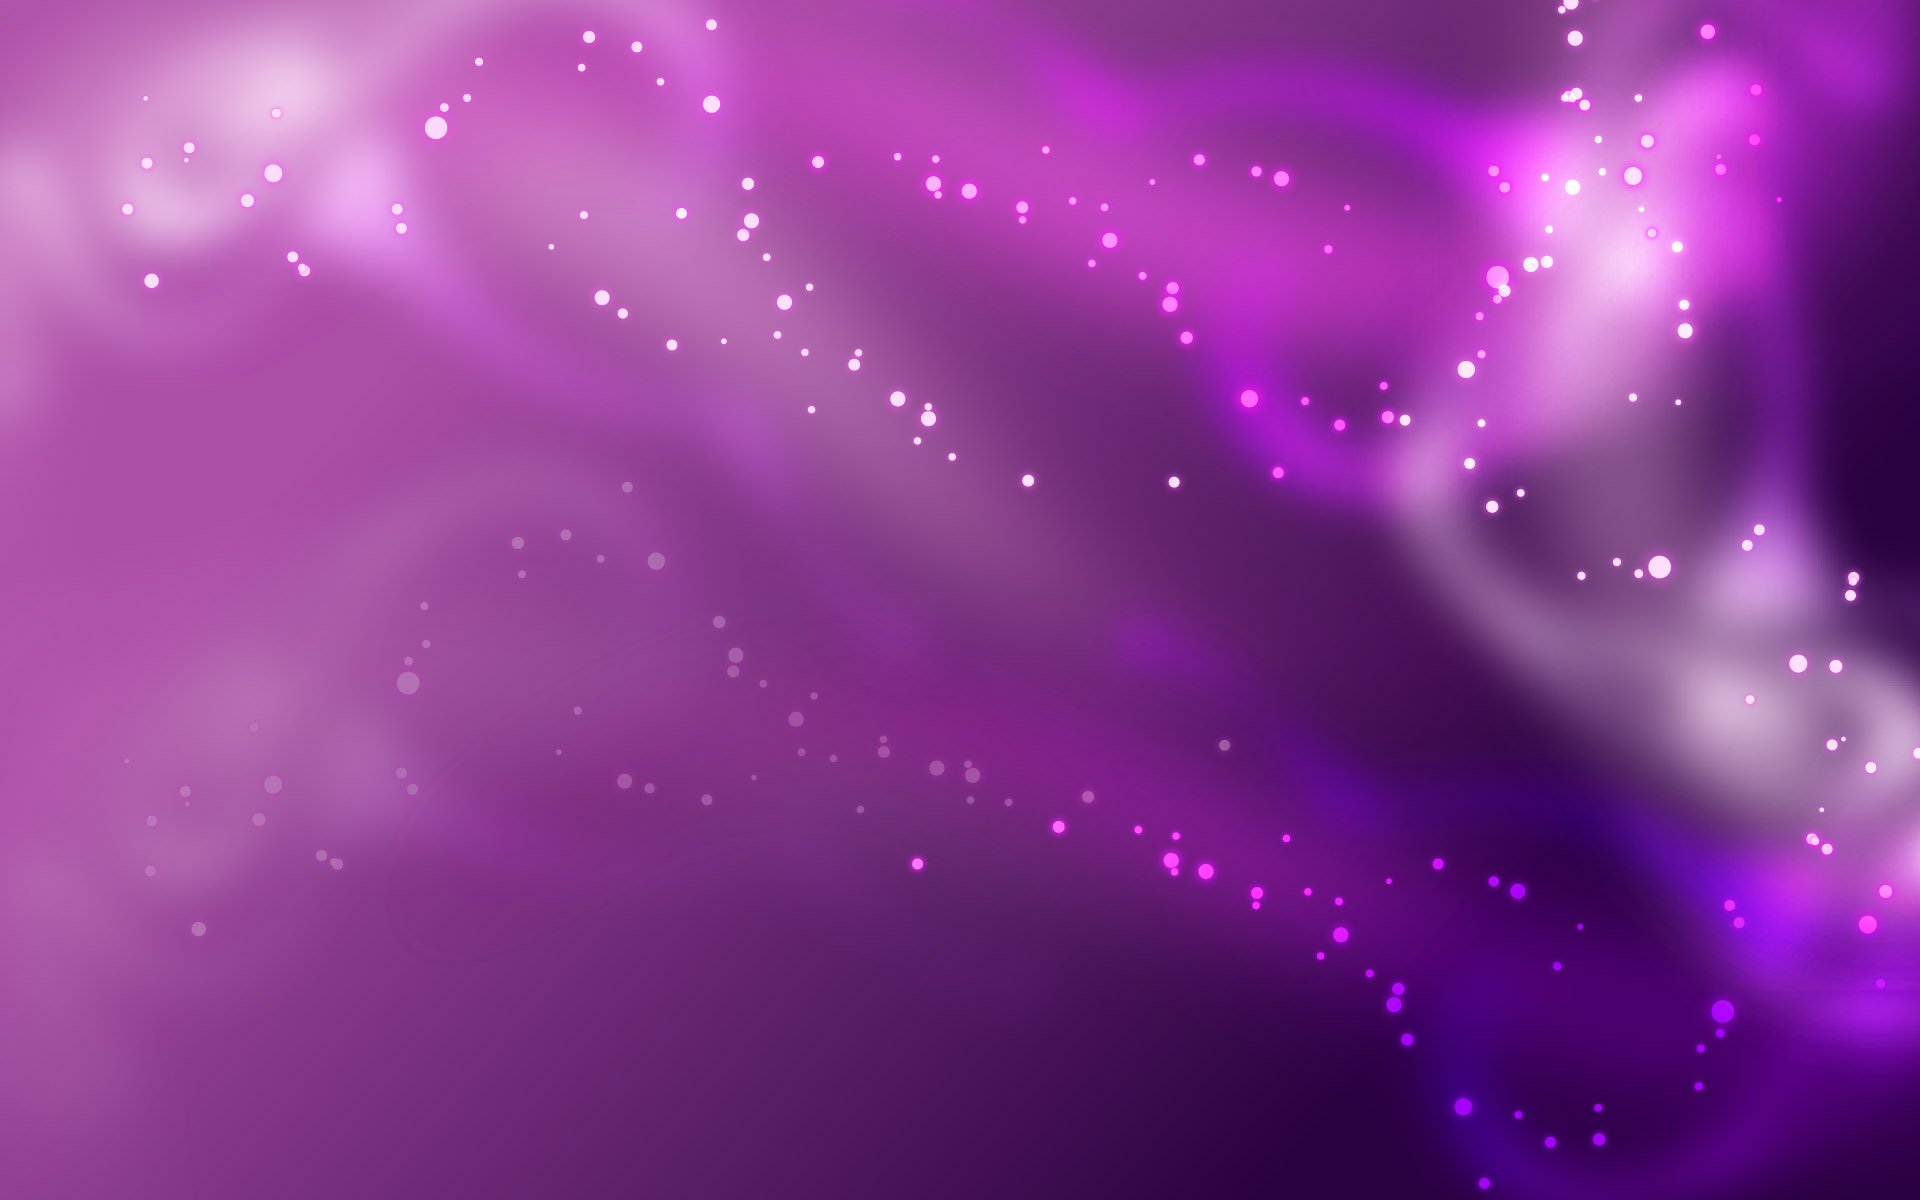 45 Stunning and Decent Purple Backgrounds takedesigns 1920x1200